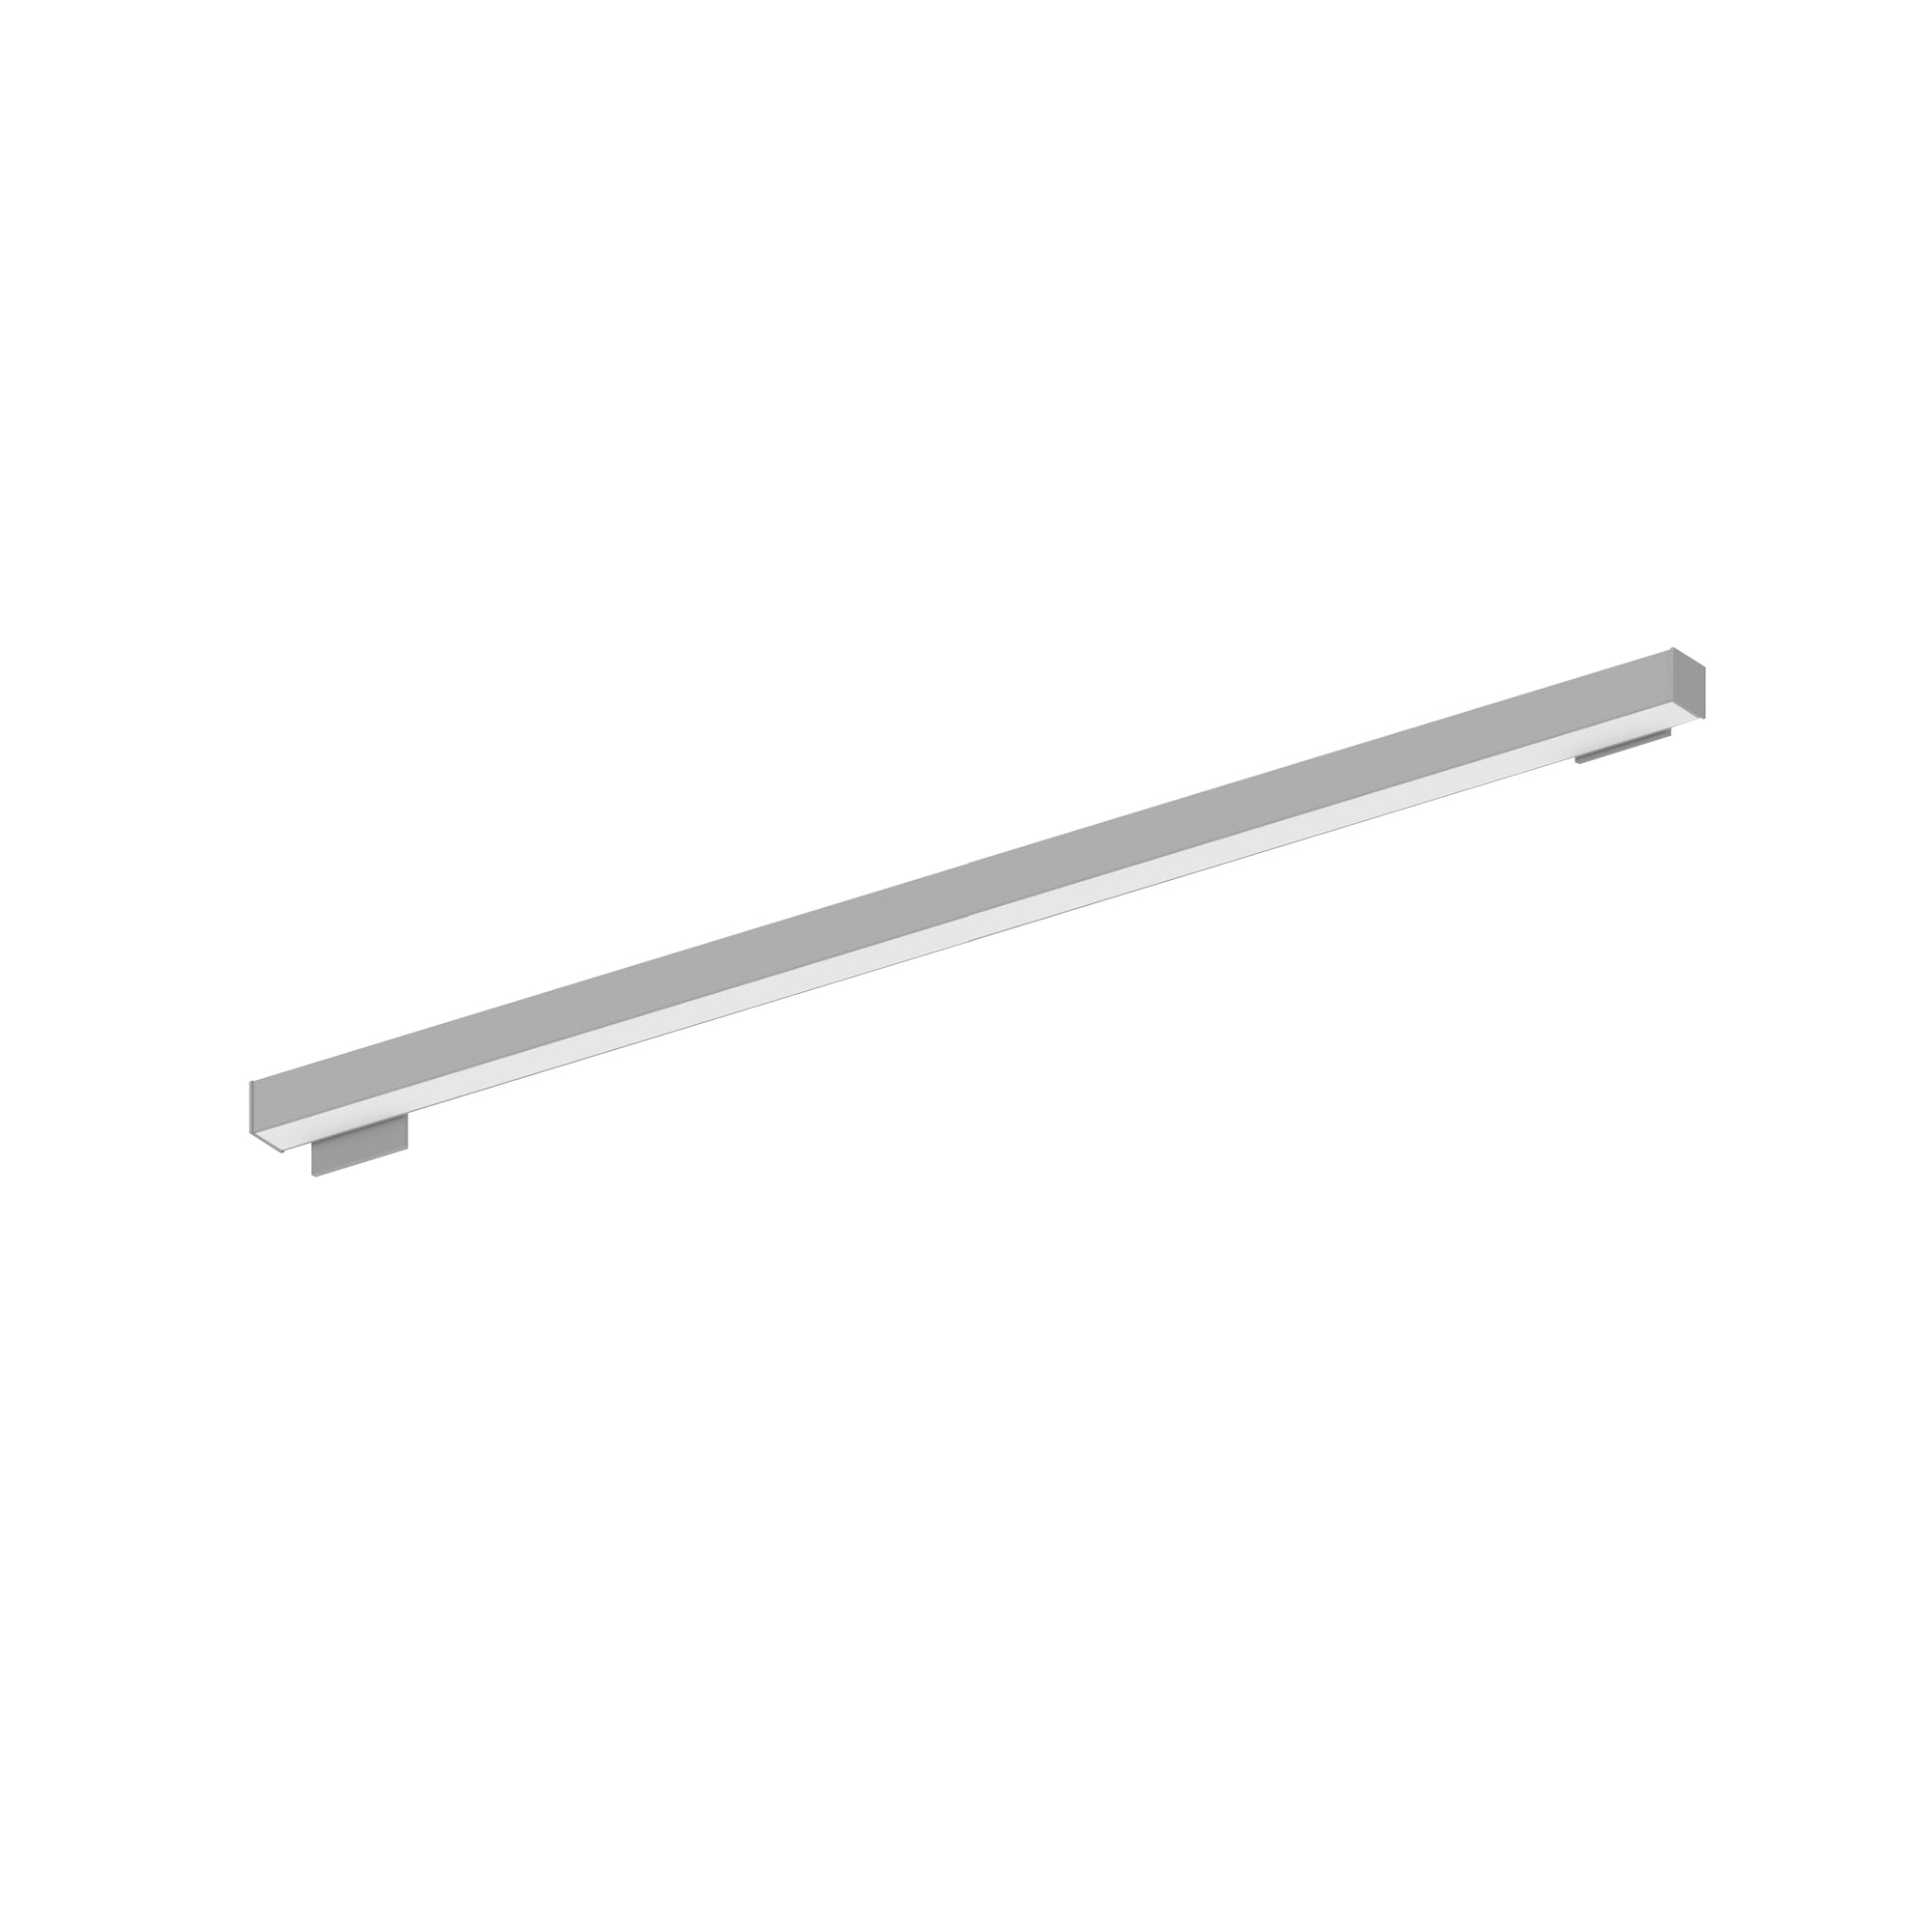 Nora Lighting NWLIN-81030A/L4-R2P - Linear - 8' L-Line LED Wall Mount Linear, 8400lm / 3000K, 4 Inchx4 Inch Left Plate & 2 Inchx4 Inch Right Plate, Right Power Feed, Aluminum Finish